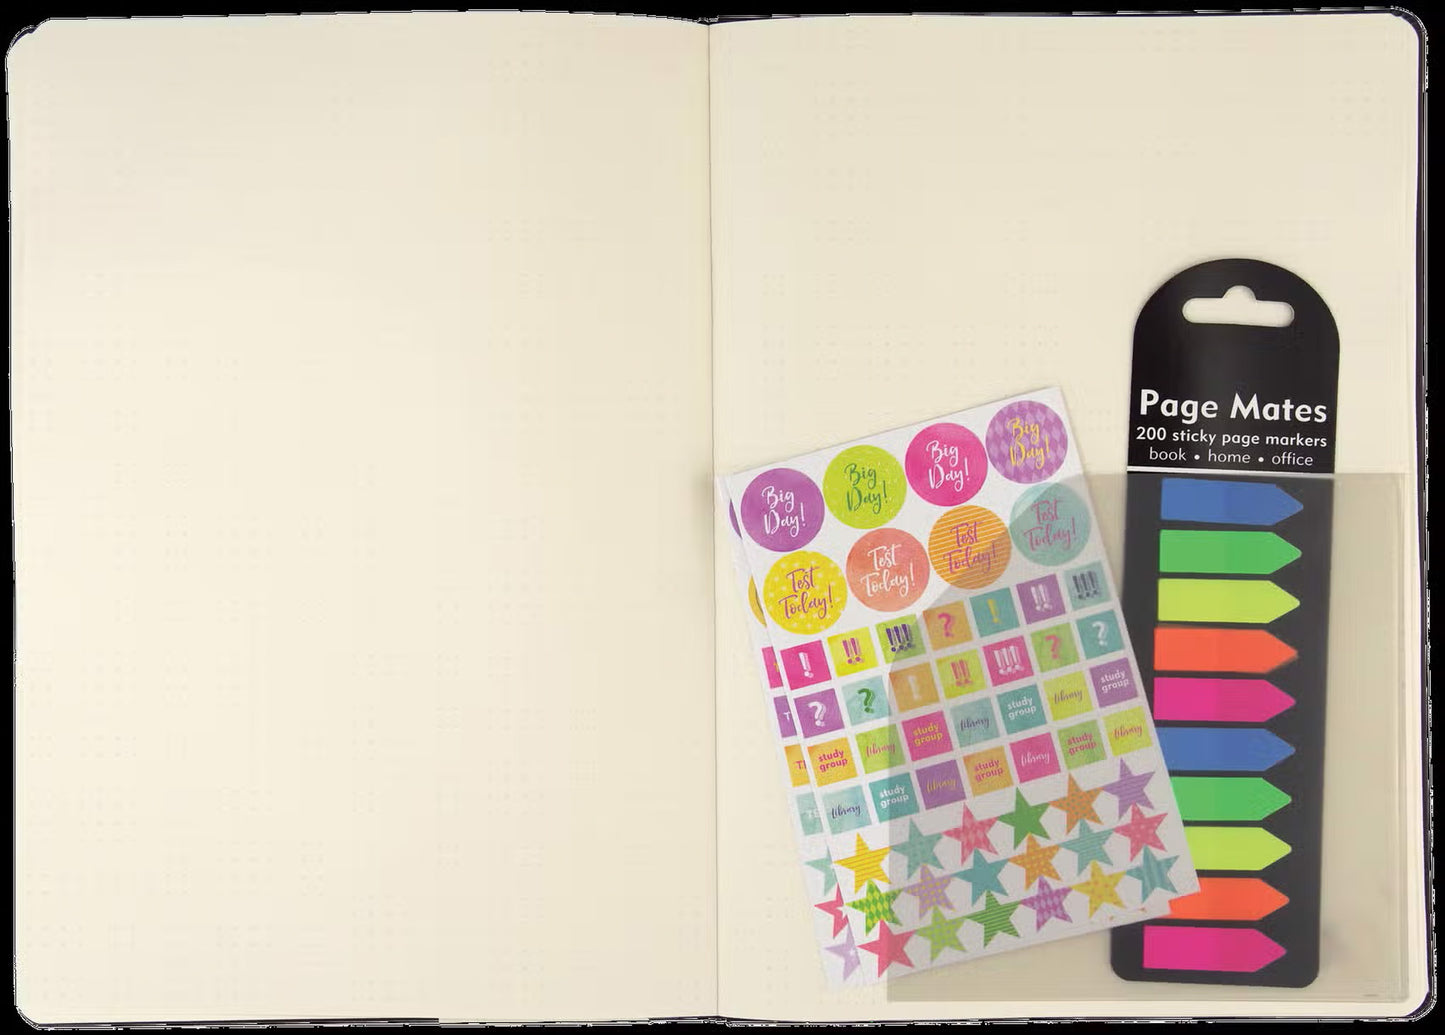 Adhesive Vinyl Pockets for Journals